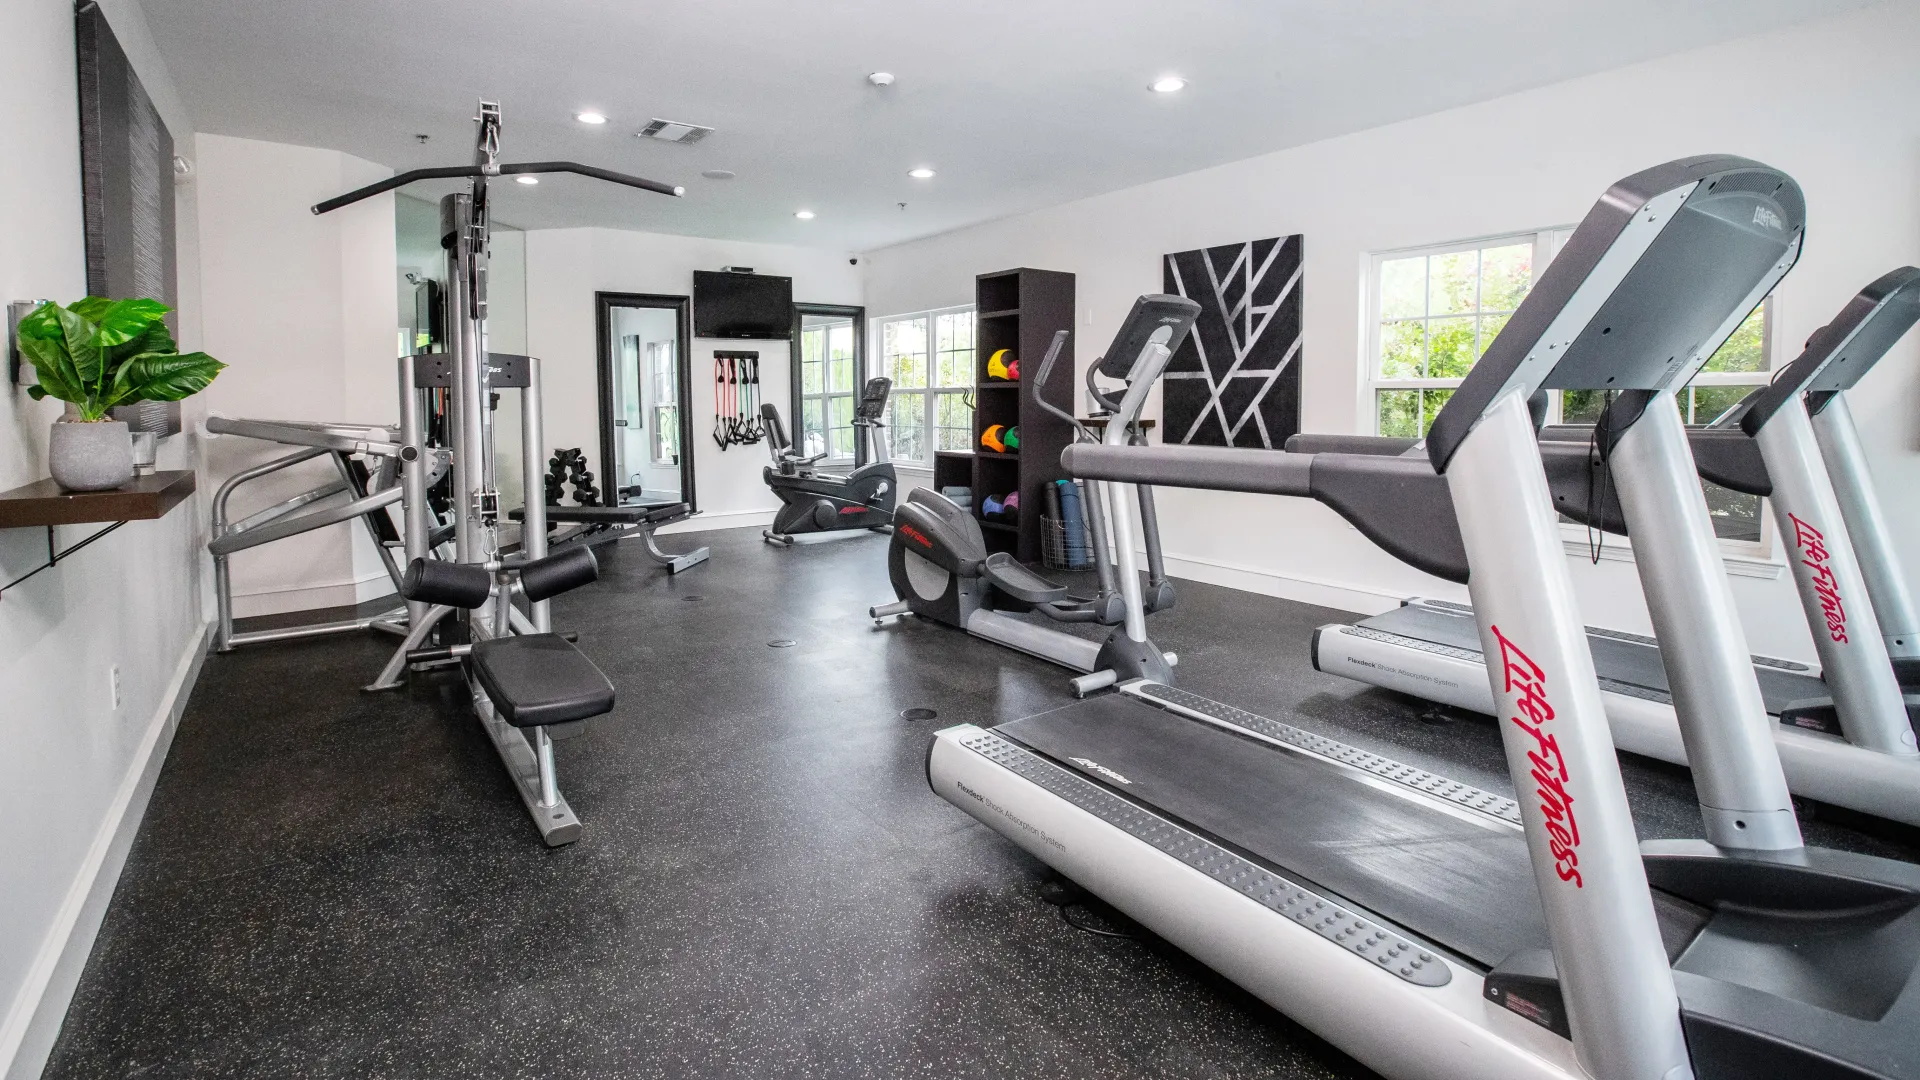 A well-equipped fitness center with modern equipment from weight training machine to ellipticals and treadmills, providing a dedicated space for residents to achieve their fitness goals.